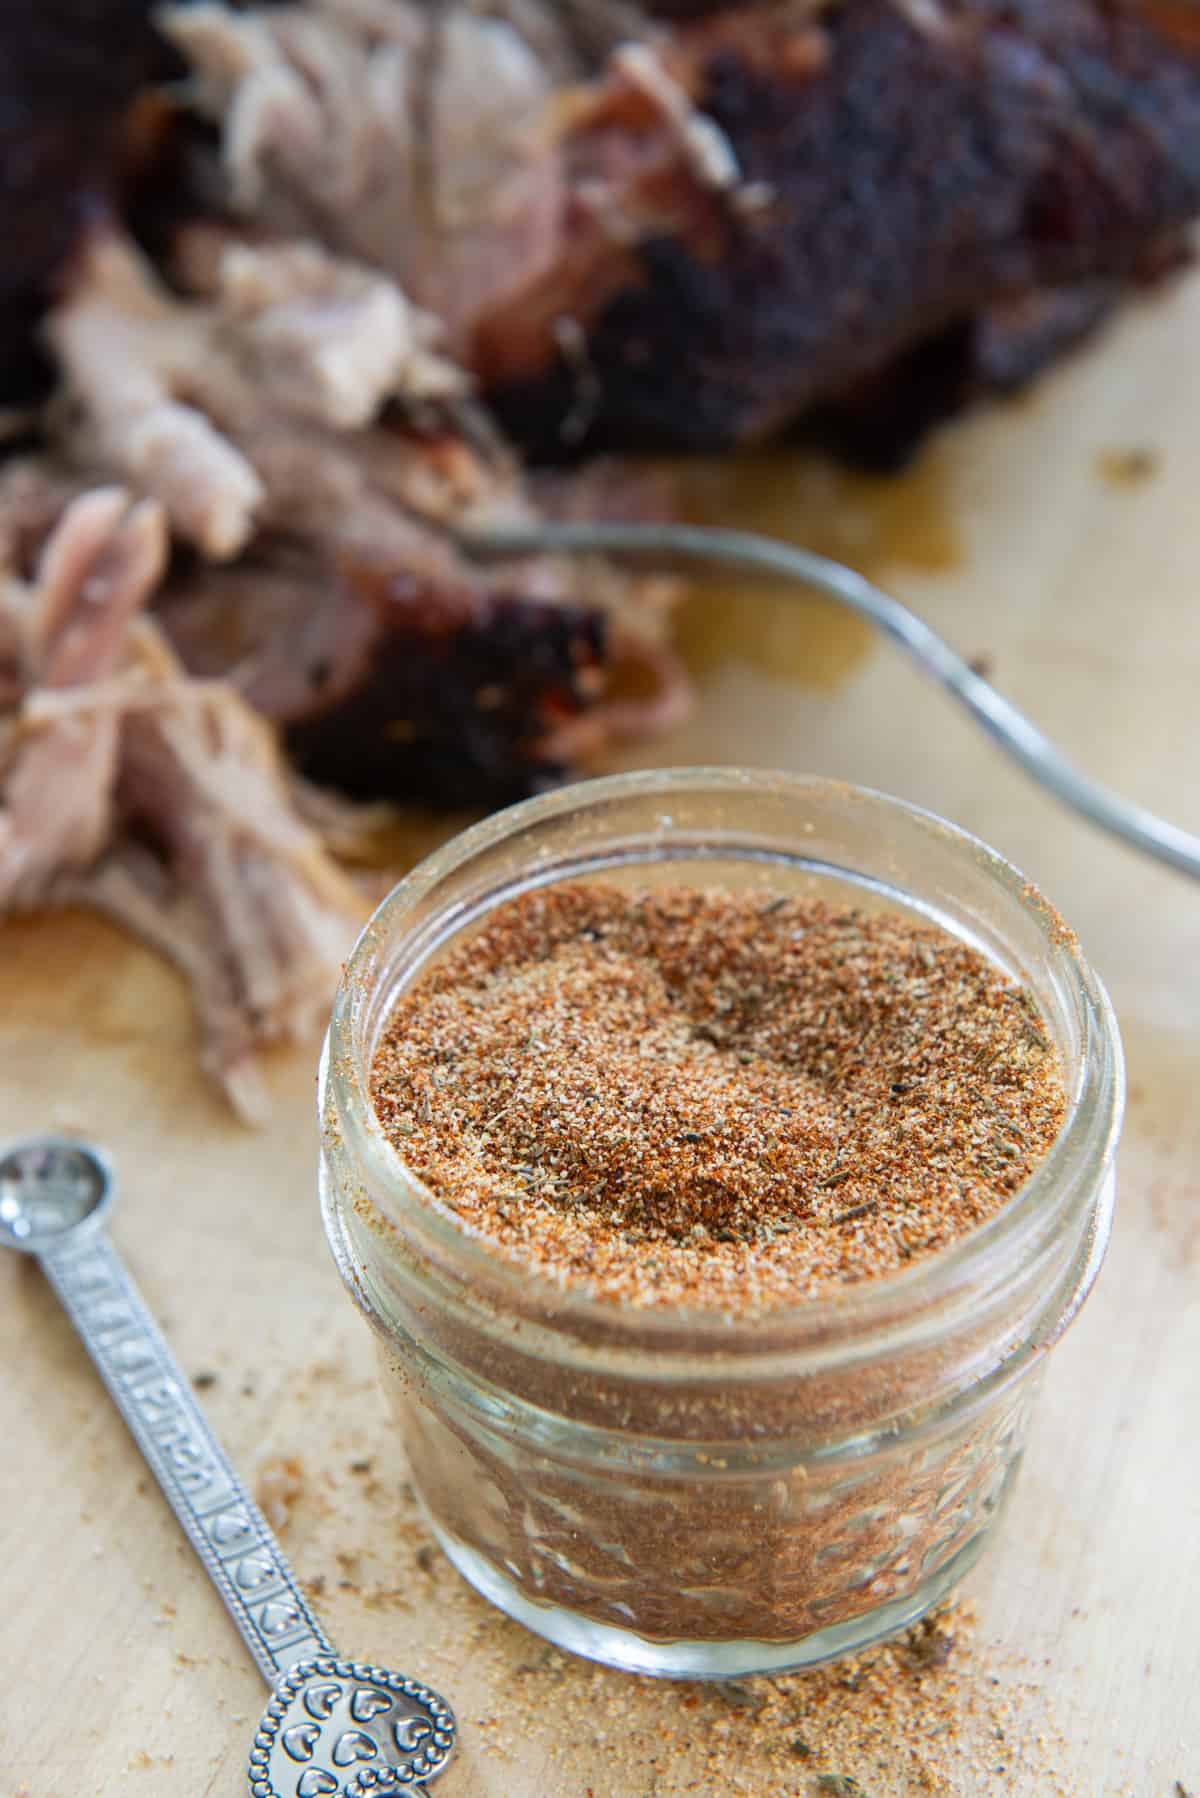 A small glass jar of pulled pork rub with pulled pork butt in background